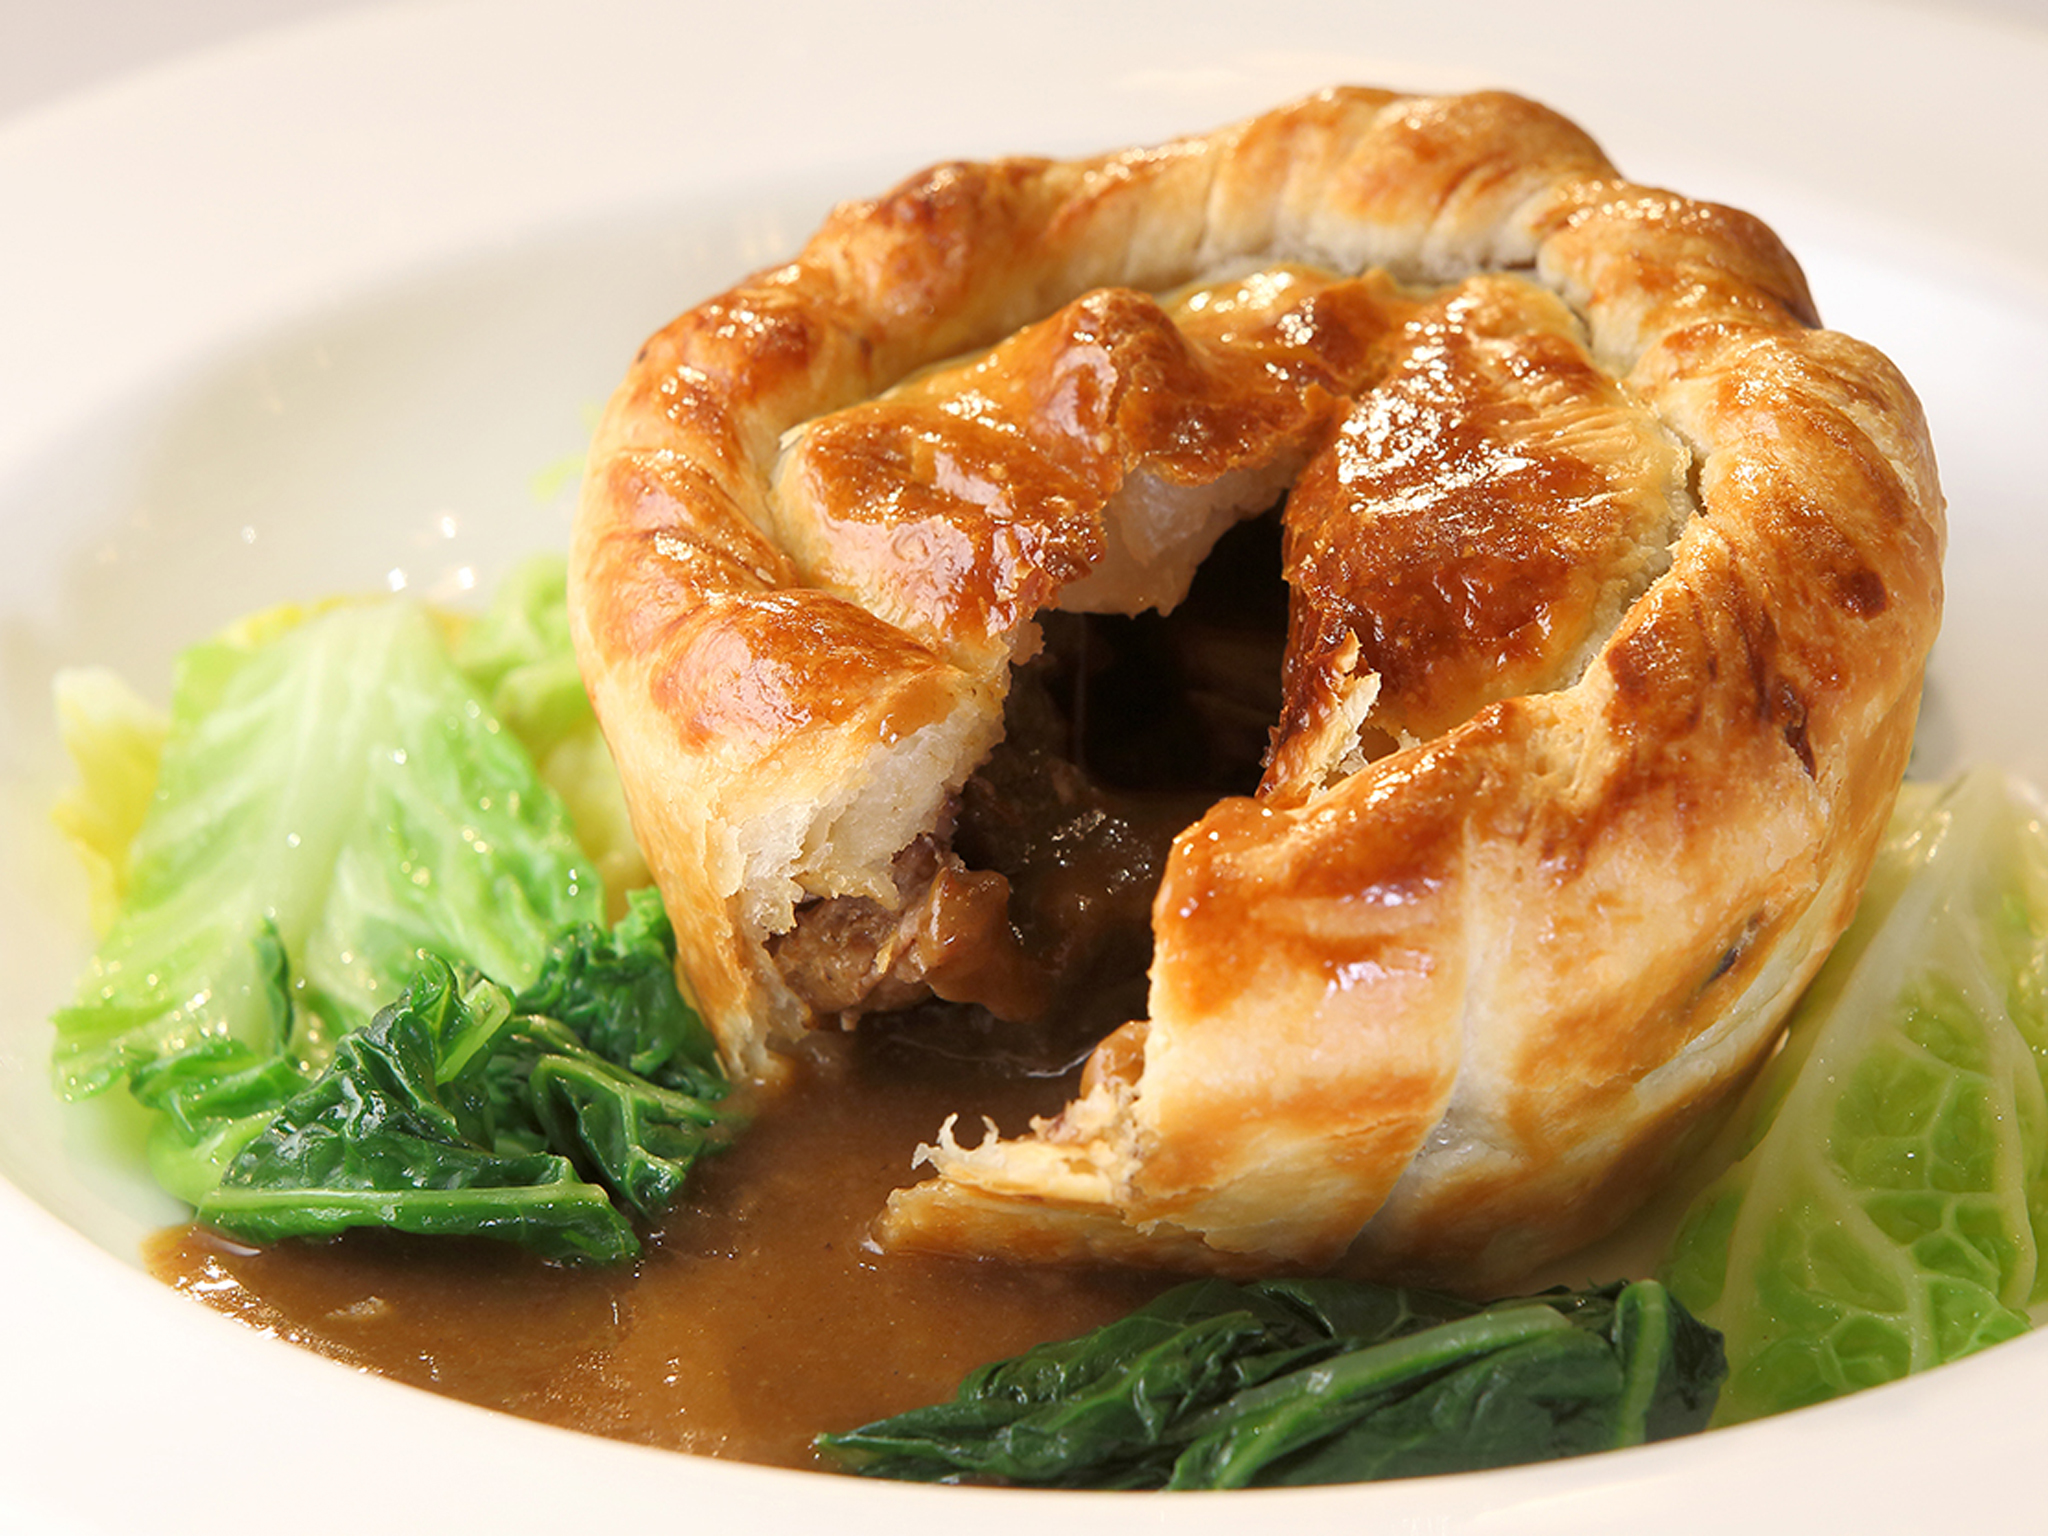 London's best pies - Time Out London